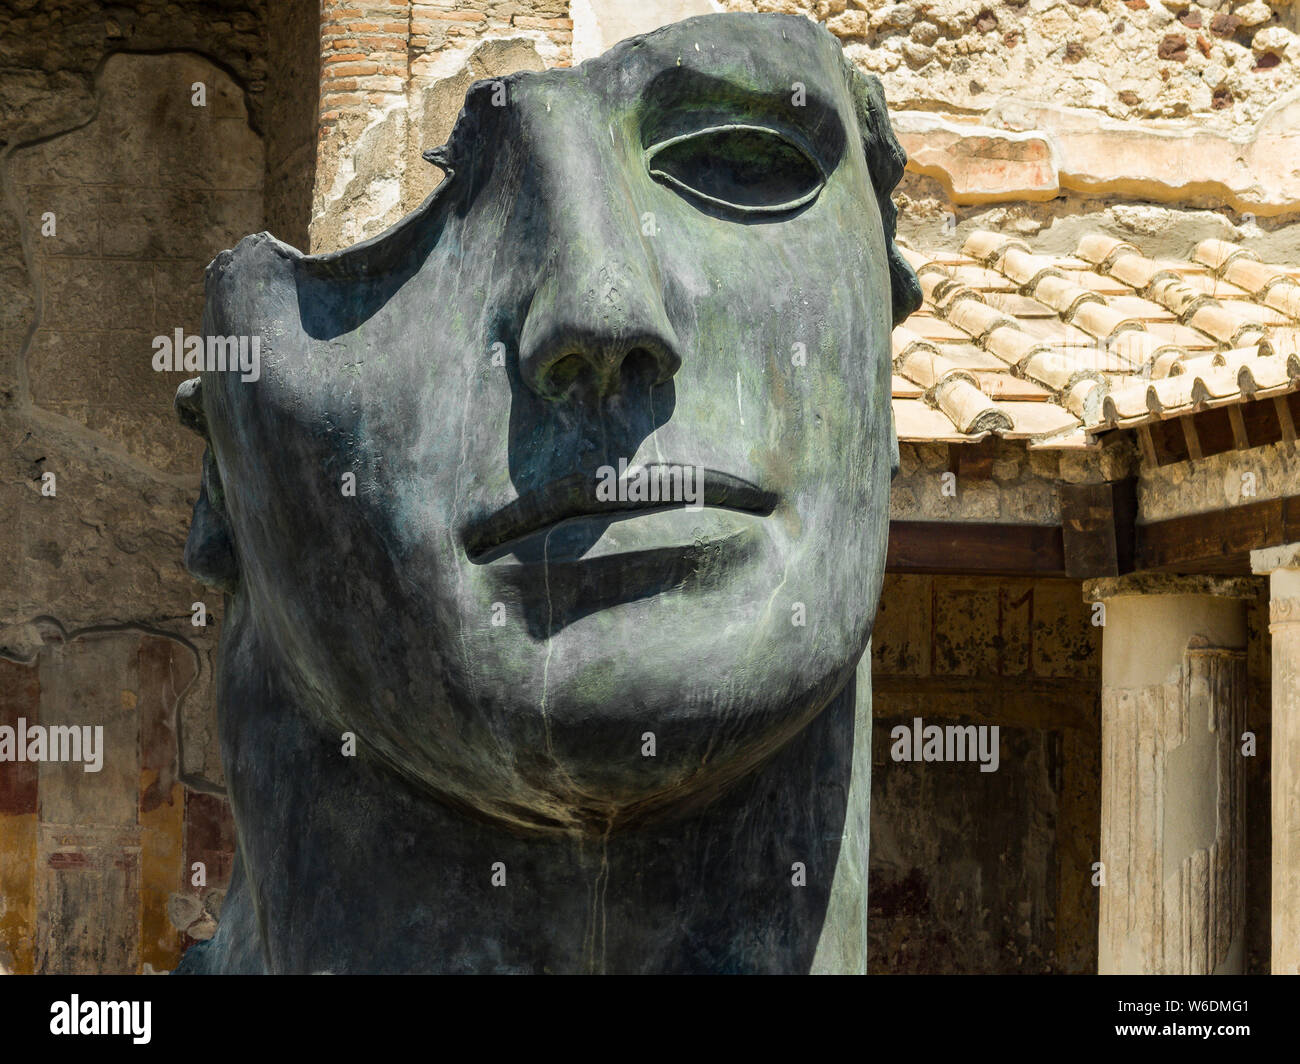 bronze statue of an human face in  Pompeii Stock Photo